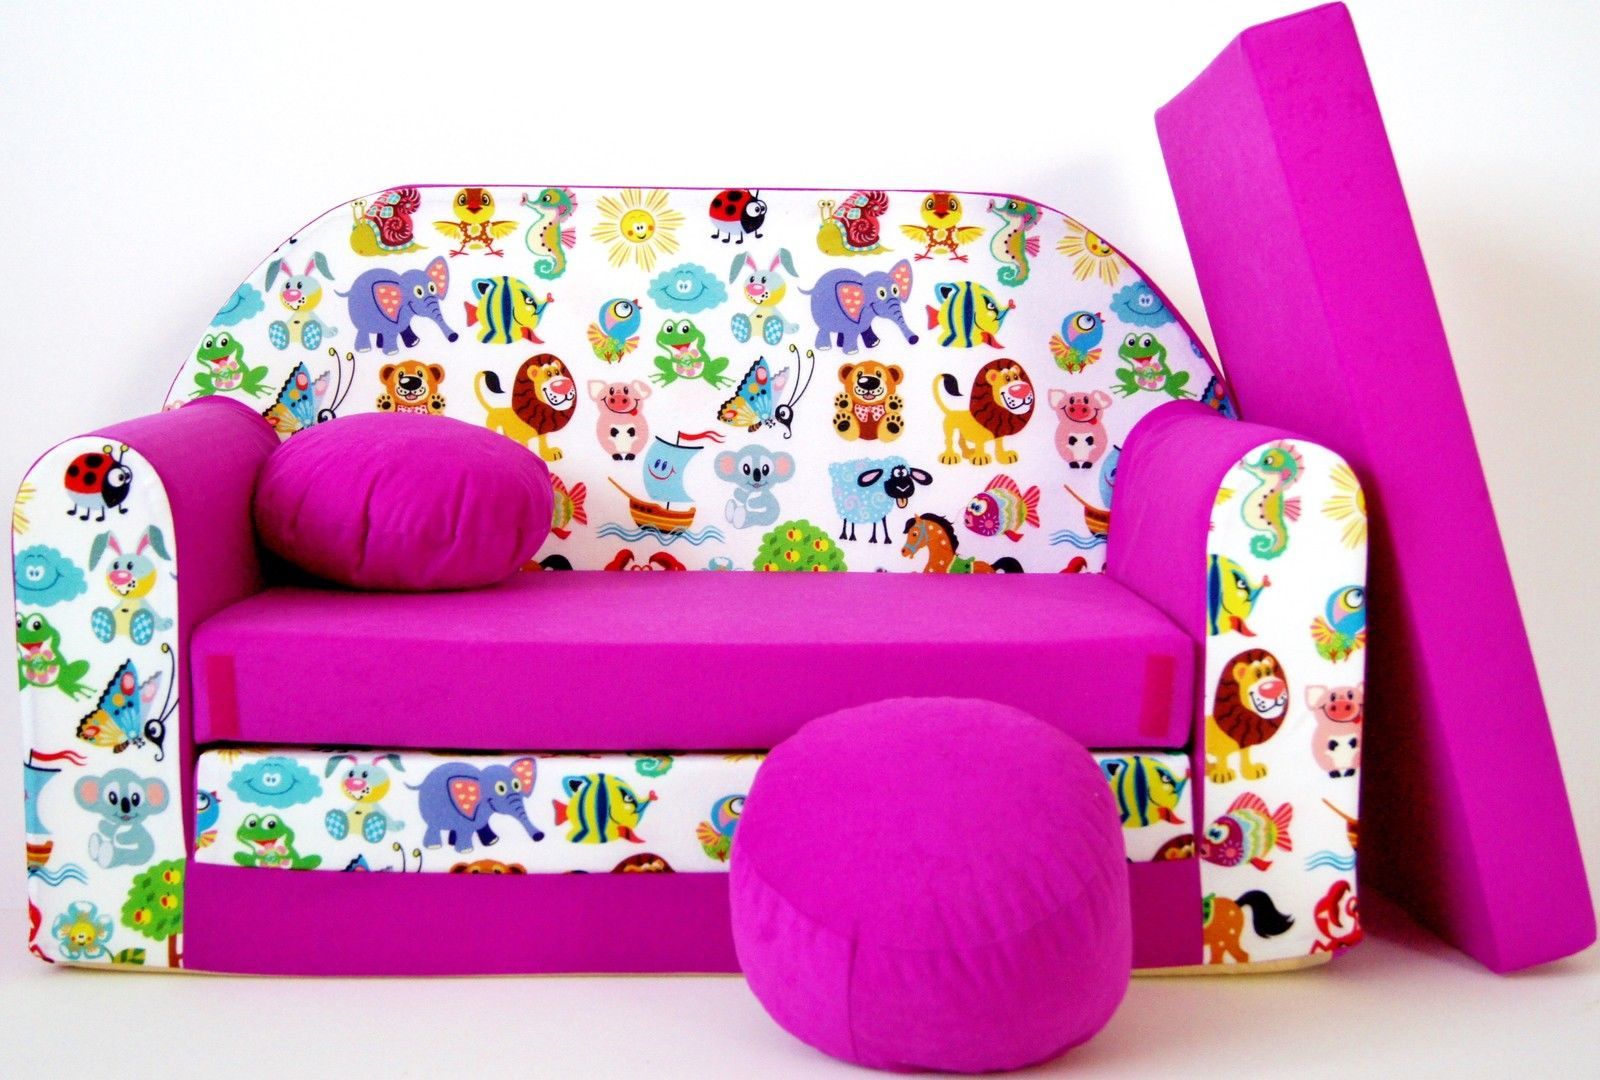 35 Fantastic Kids Fold Out Chair Beds – Home Decoration And Inspiration Pertaining To Children's Sofa Beds (View 20 of 20)